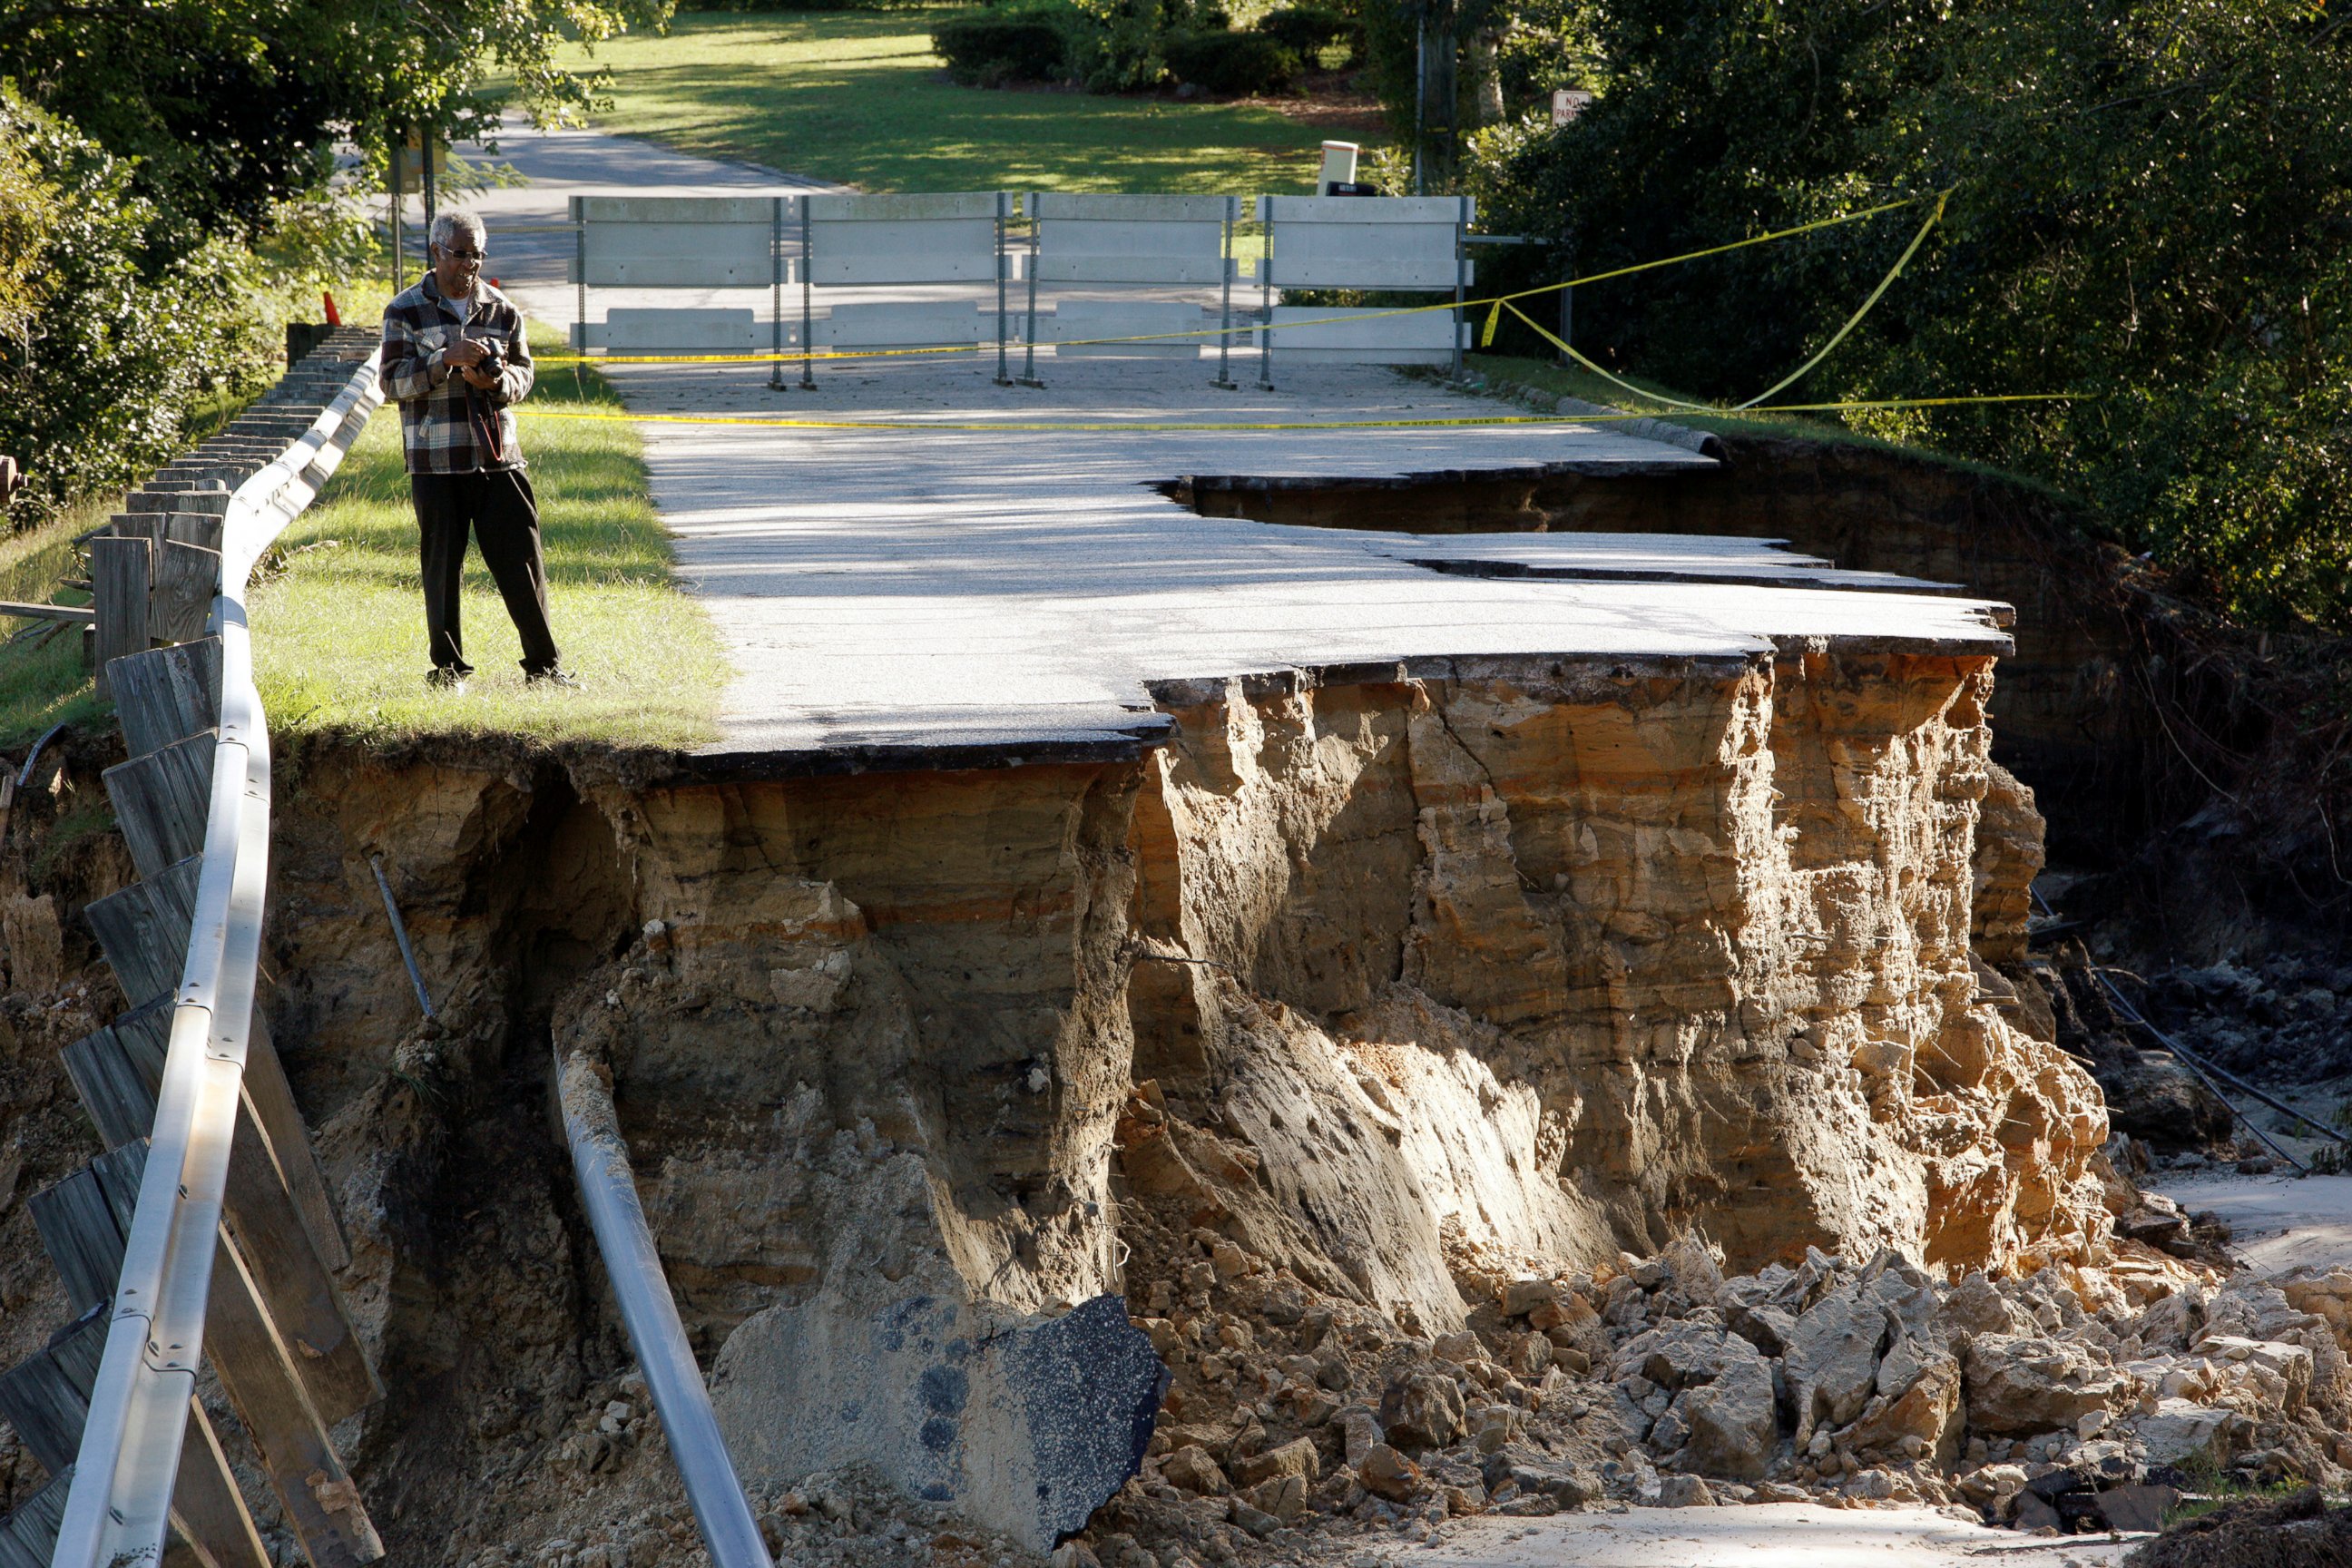 PHOTO: A resident surveys the scene of a washed out road after Hurricane Matthew struck the state, in Fayetteville, North Carolina, Oct. 10, 2016.   